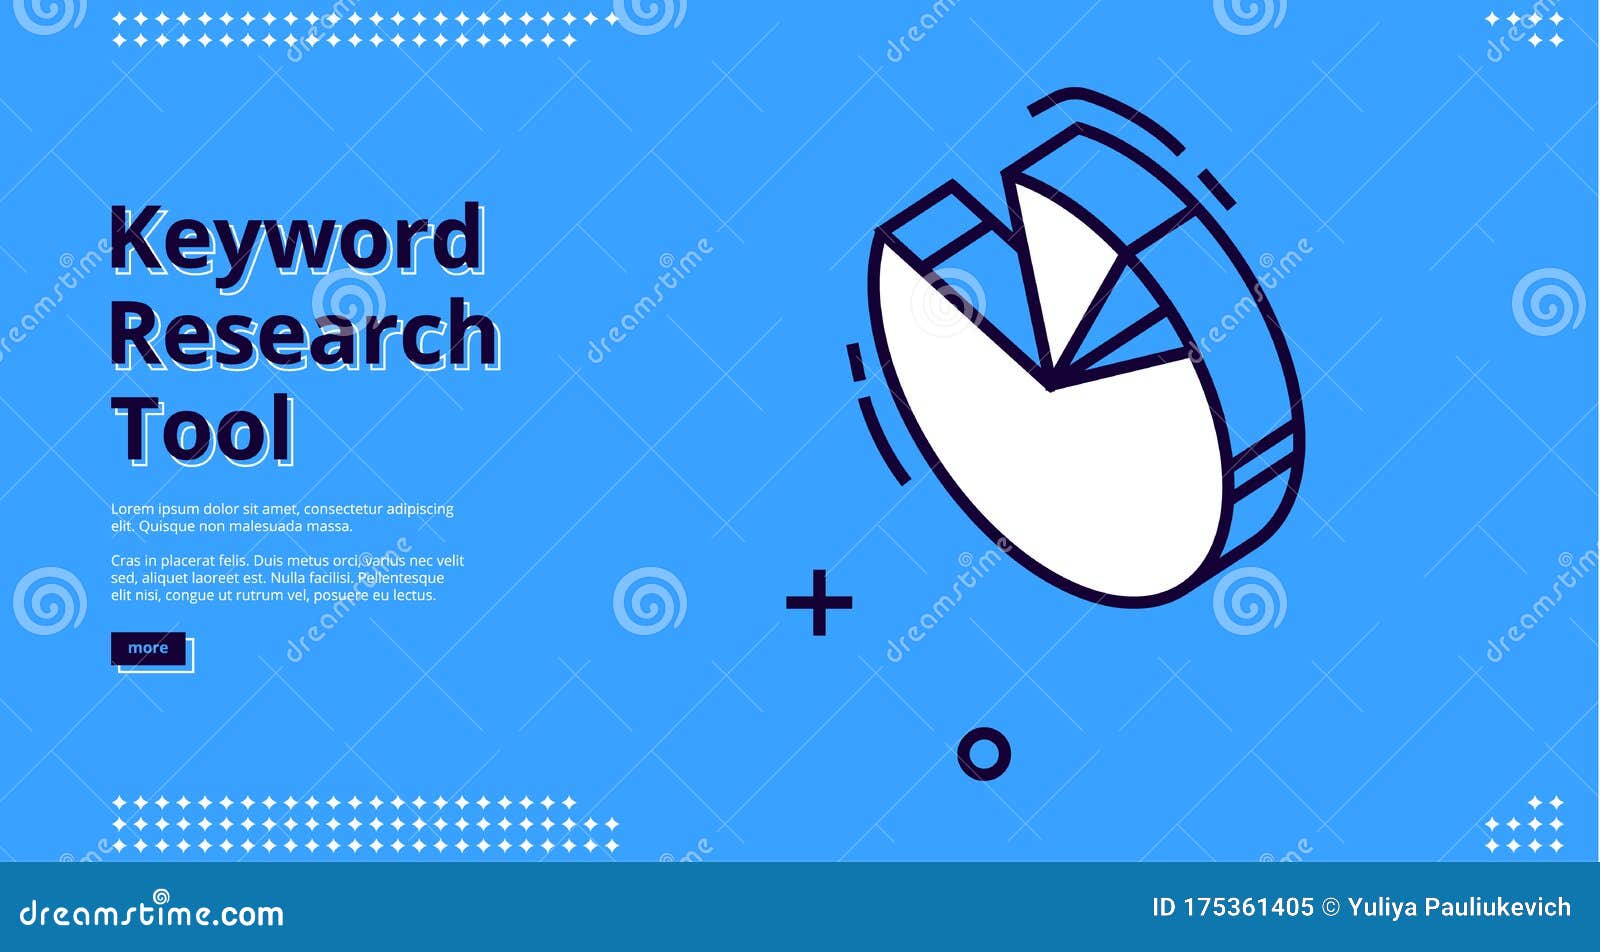 Keyword Research Tool Banner With Isometric Chart Stock Vector Illustration Of Internet Network